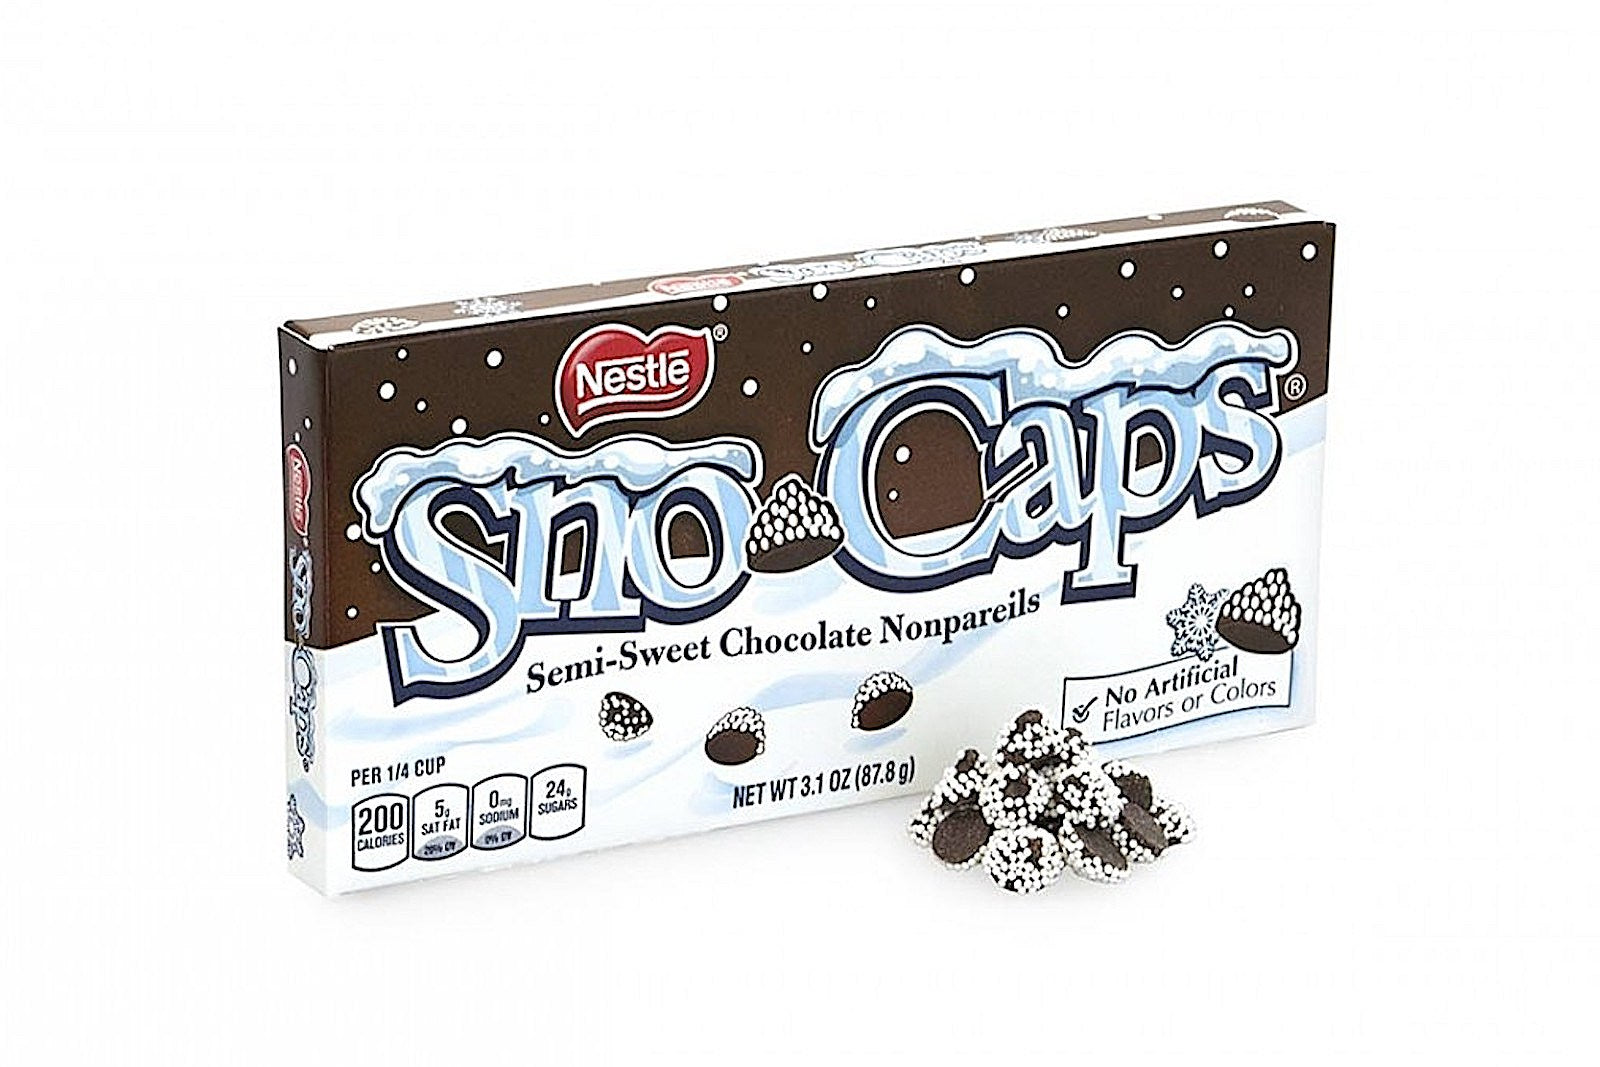 Where can I find it: Sno-Caps candy, antique appraiser